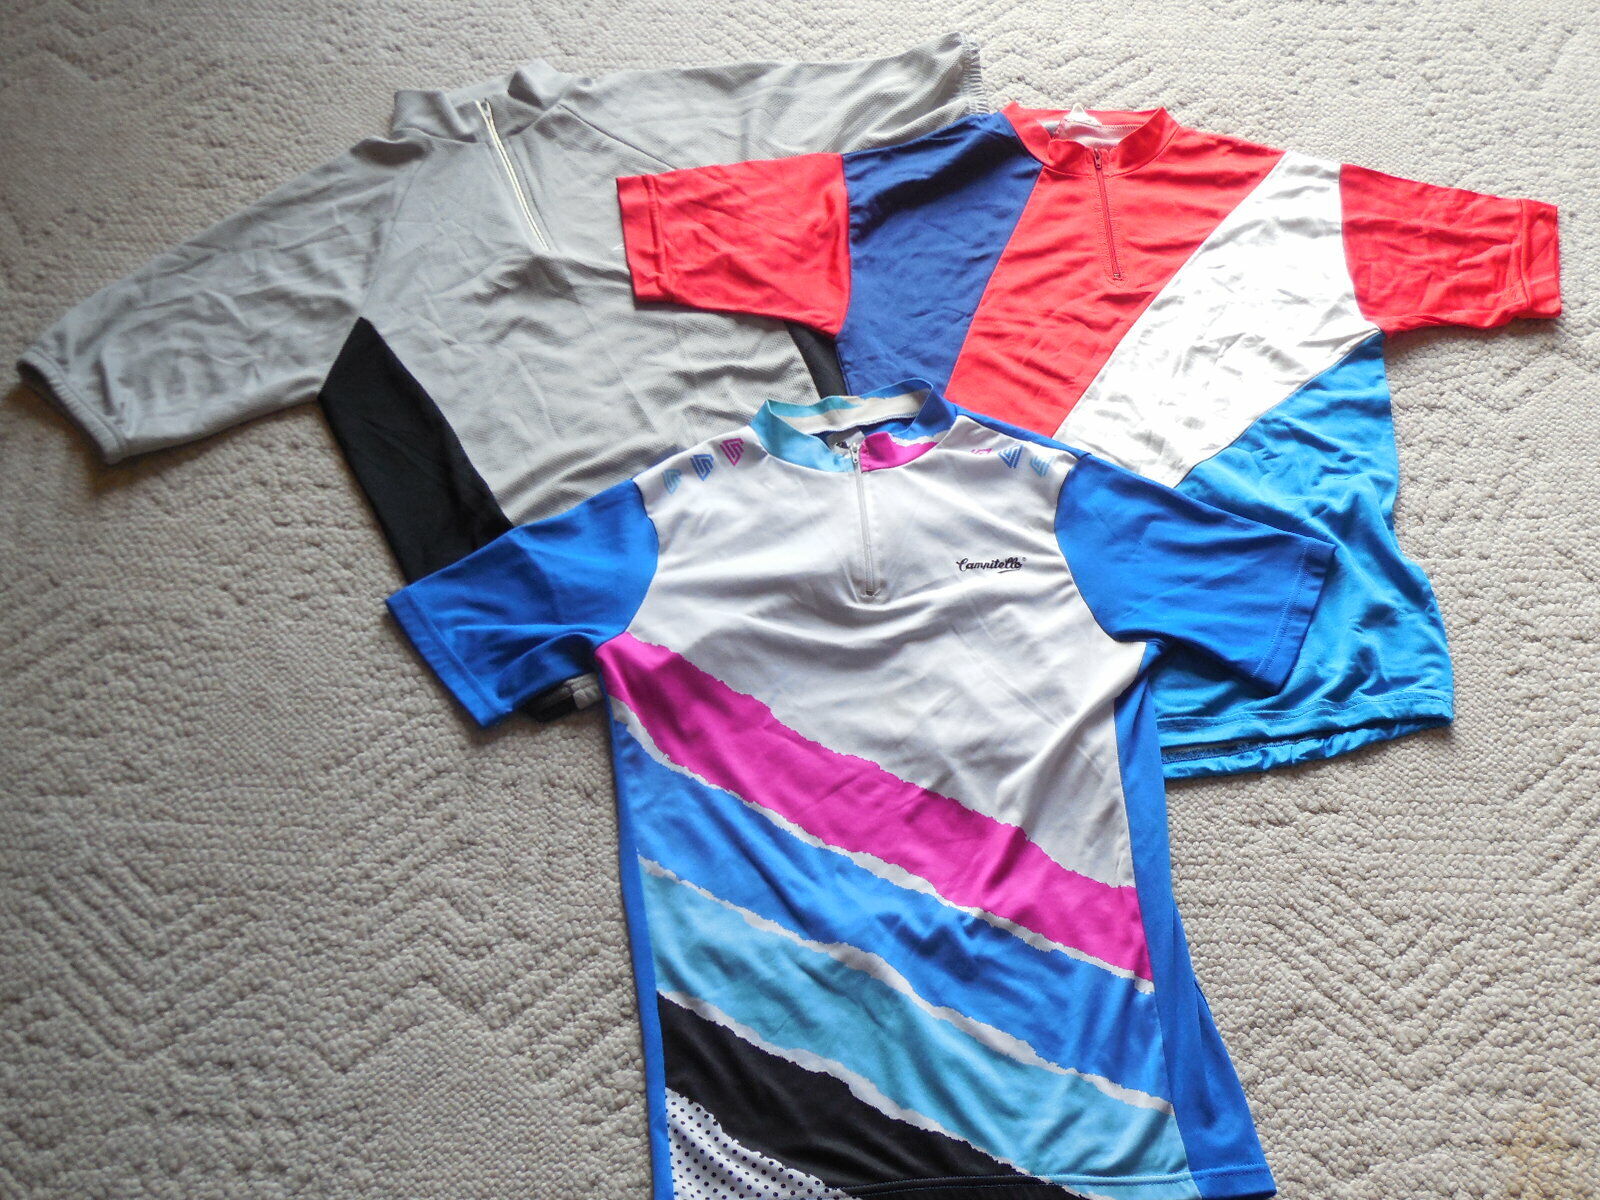 Lot 3 Vintage Cycling Jerseys Med Large Campitello Red Blue White Gray Belgium